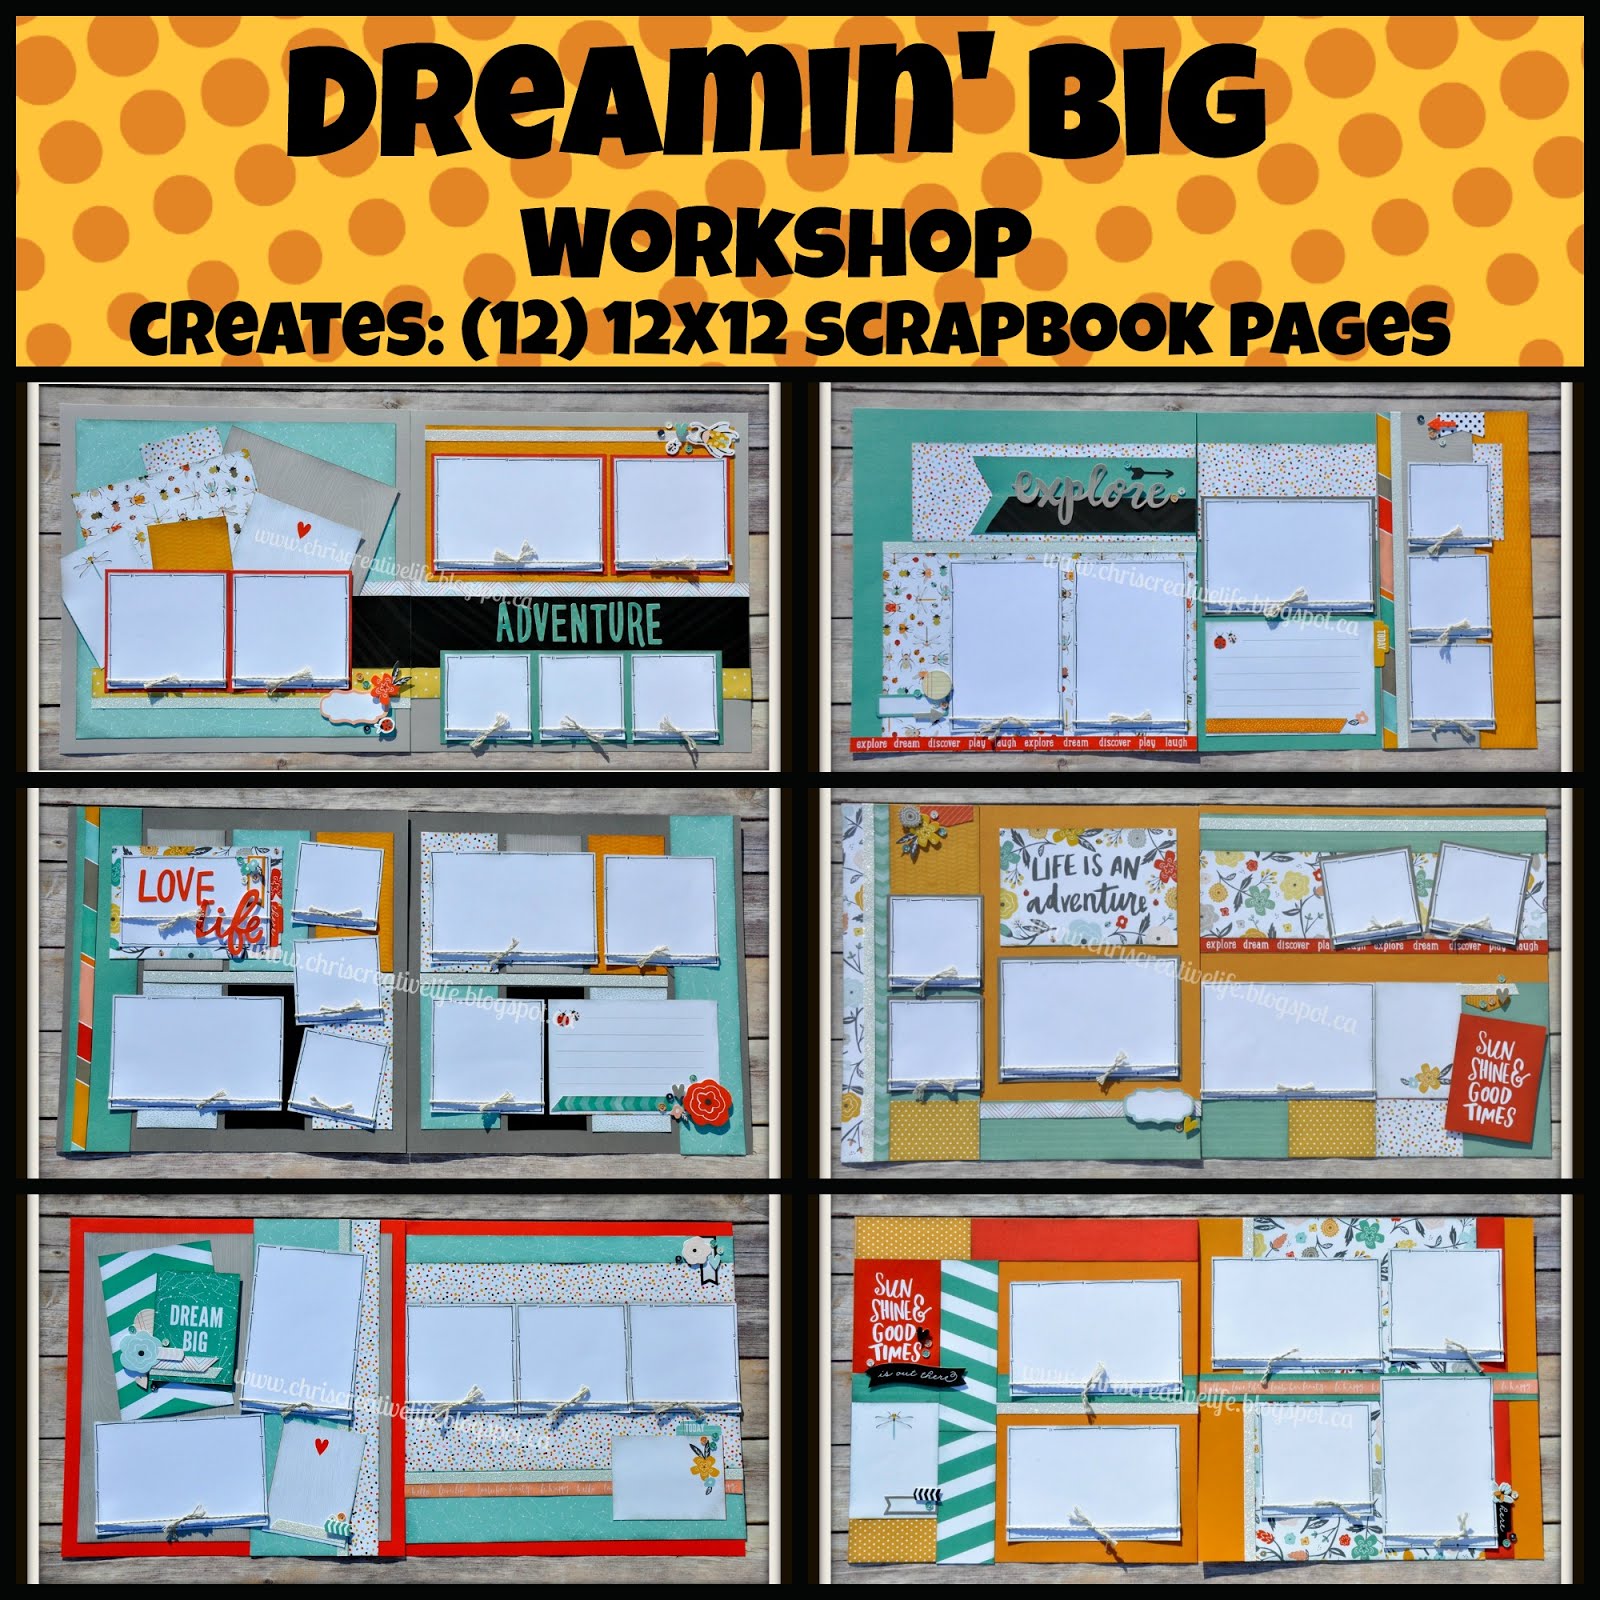 Dreamin' Big Workshop Guide and e-files